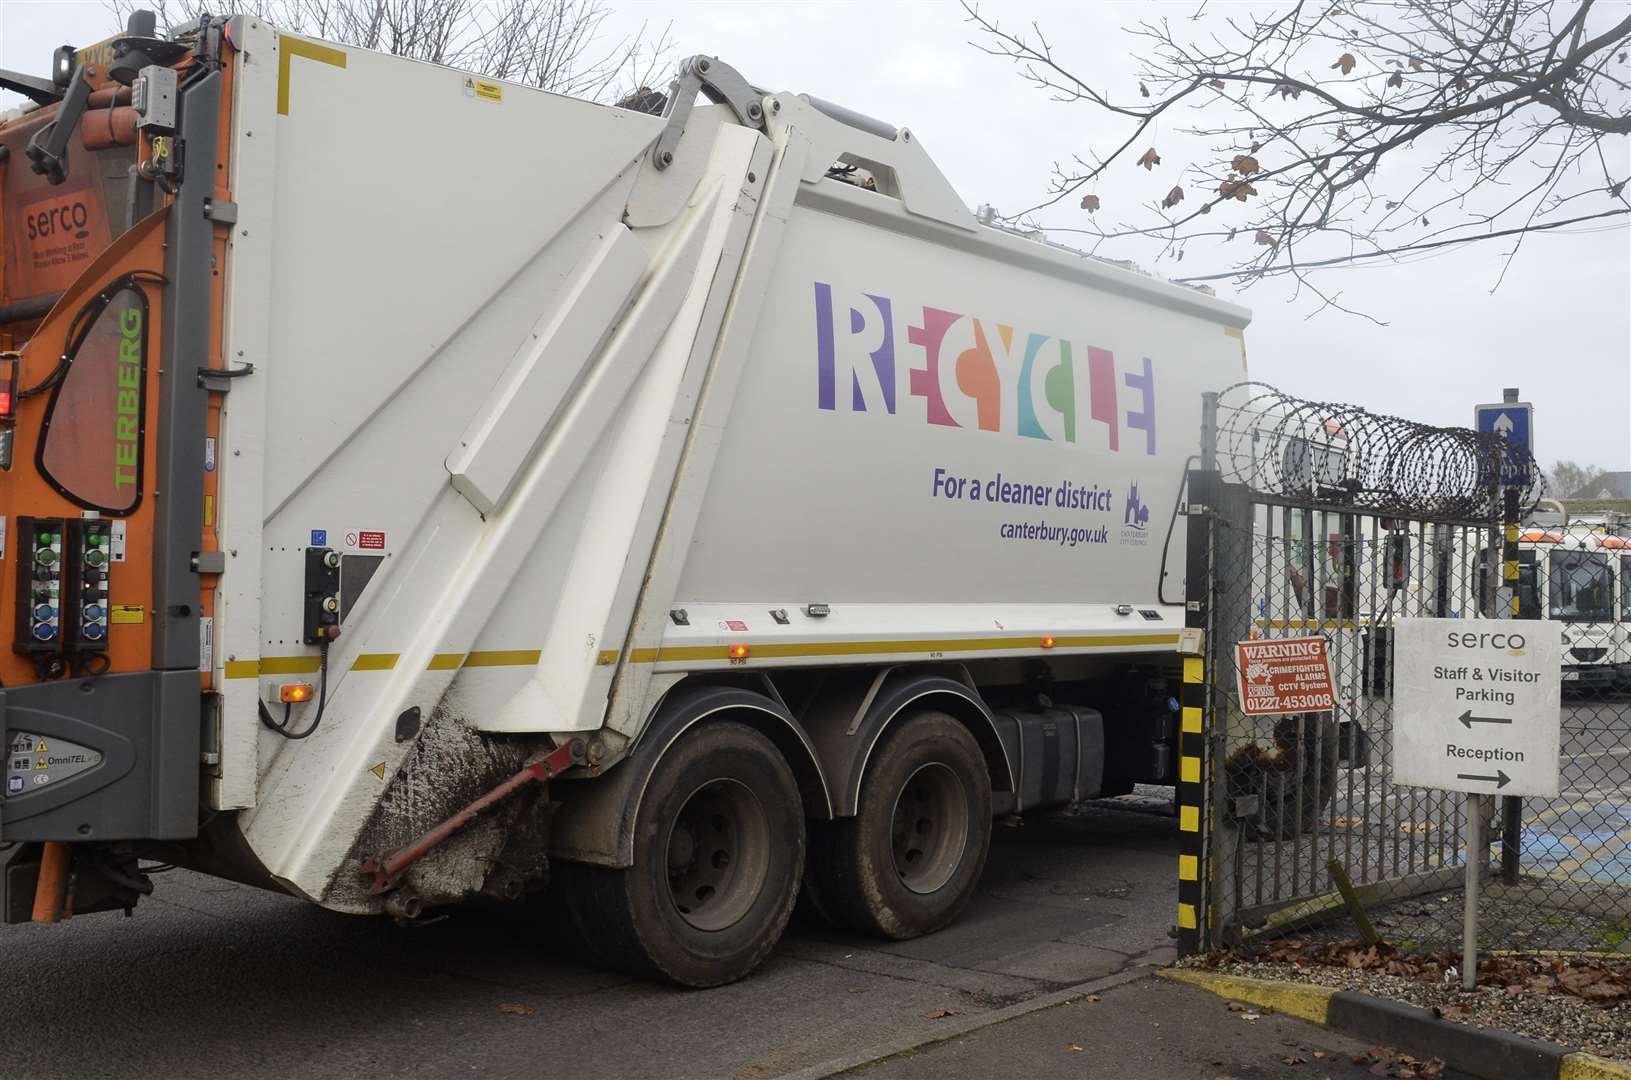 A Serco recycling lorry in Canterbury